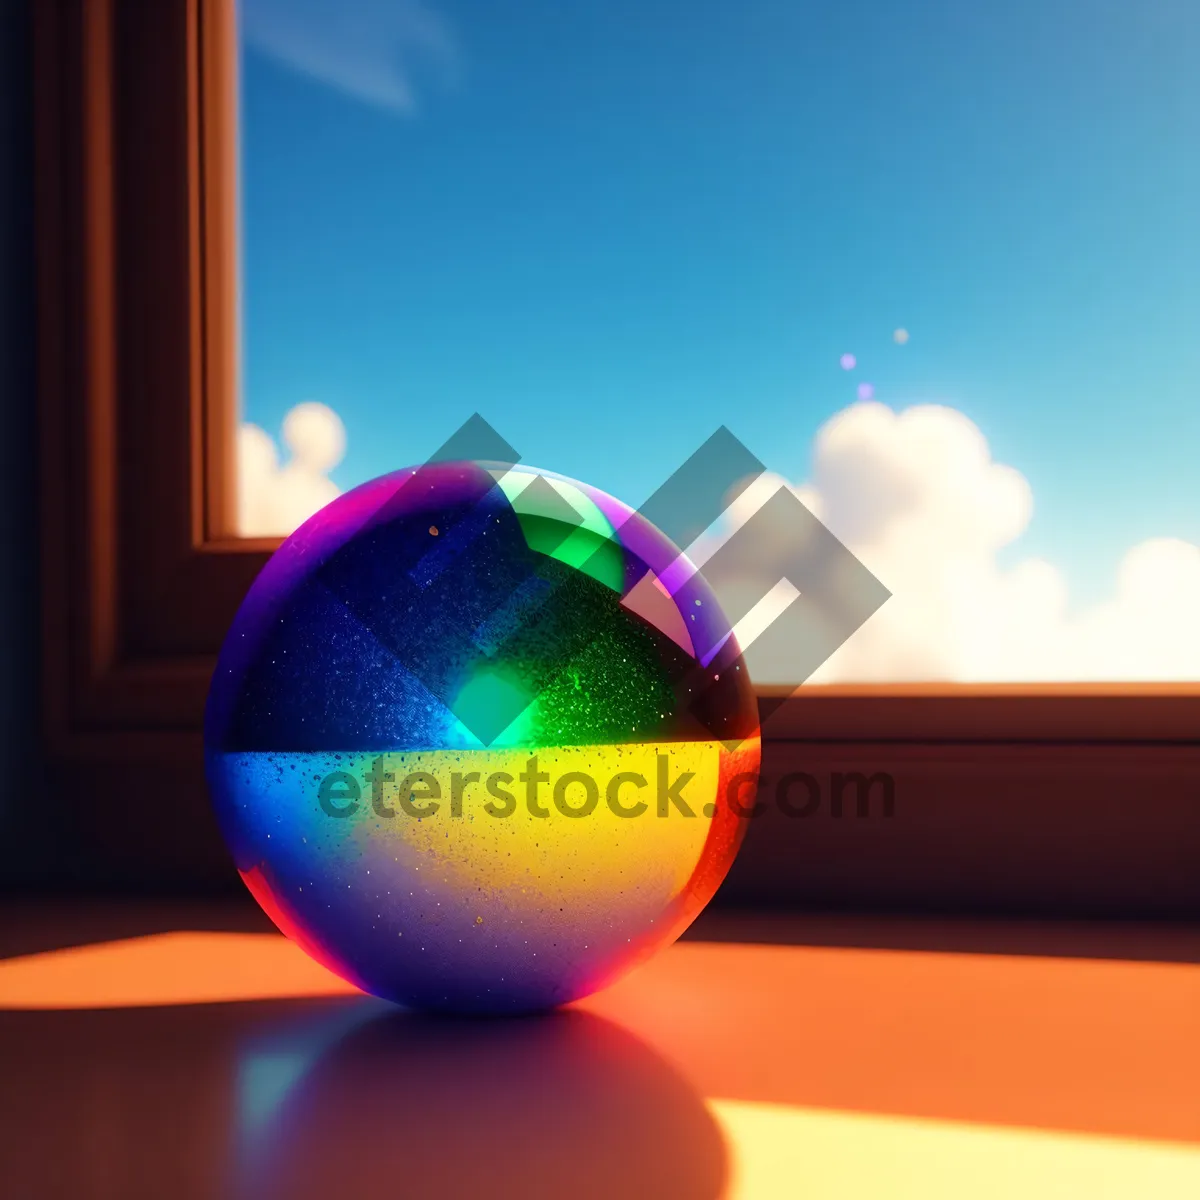 Picture of Colorful Glass Sphere Icon: Shiny Round Graphic with Reflection